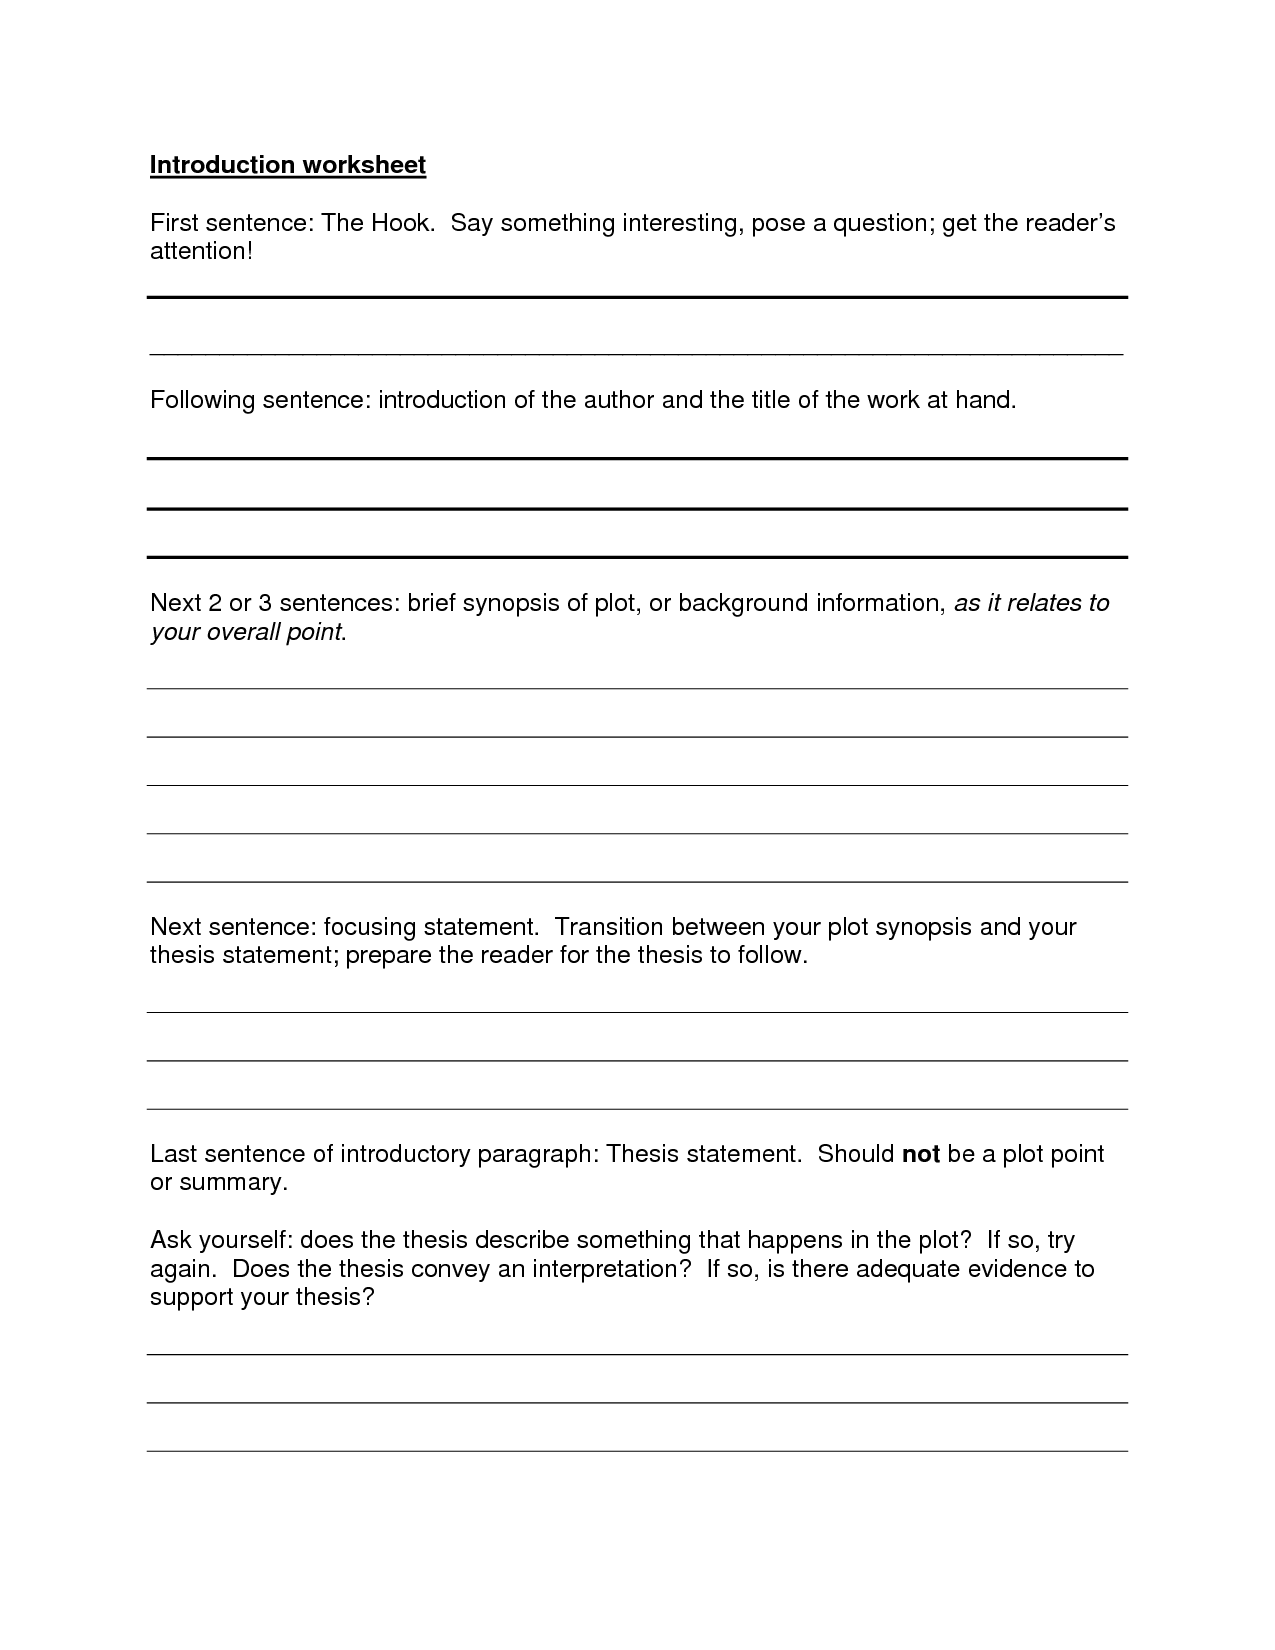 11 Best Images Of Introduction Paragraph Worksheet Essay Writing Worksheets Five Paragraph